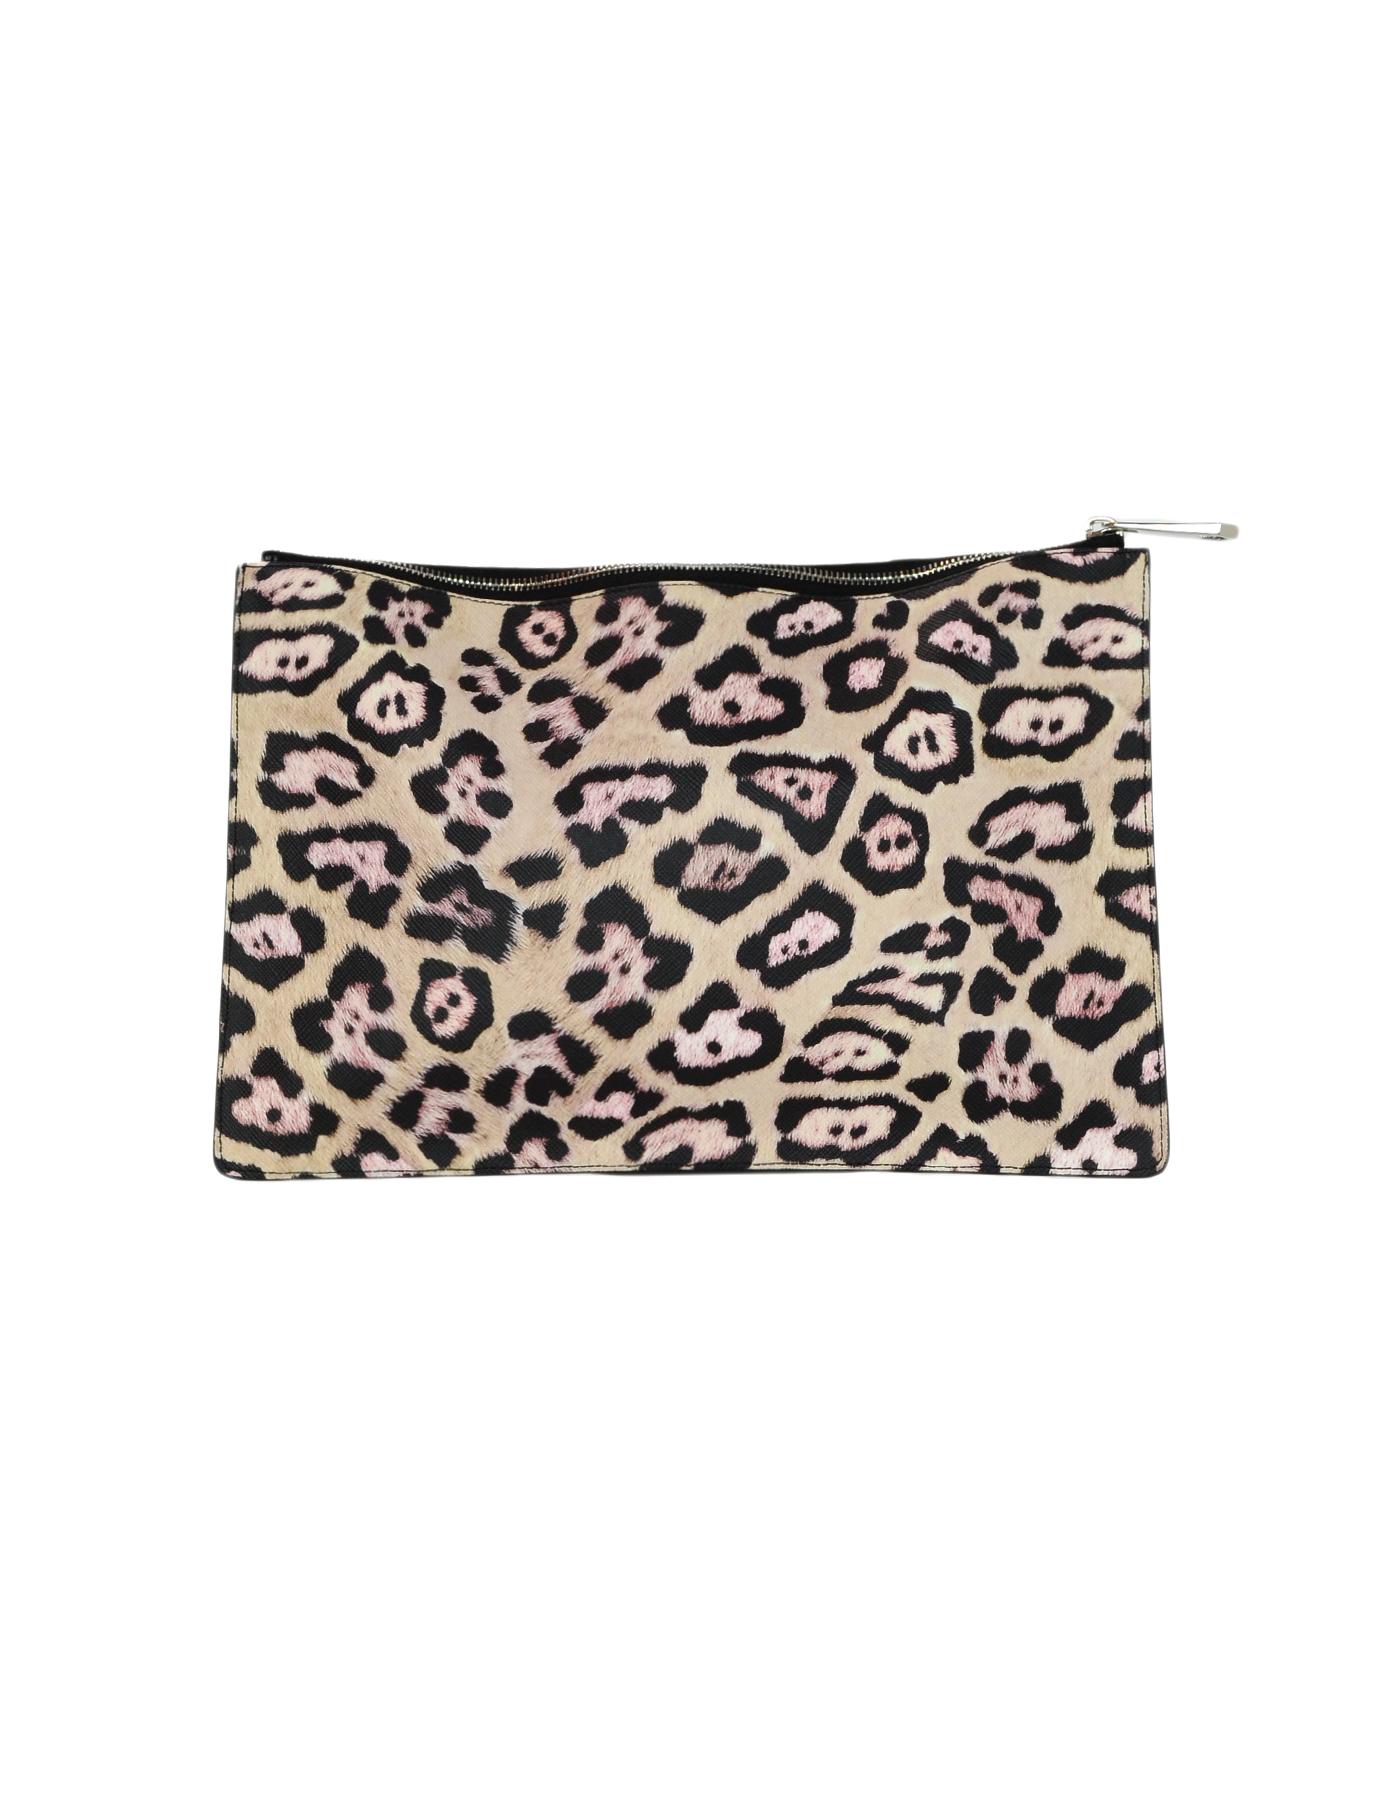 Beige Givenchy Leopard Print Grained Leather Zip Top Clutch Bag